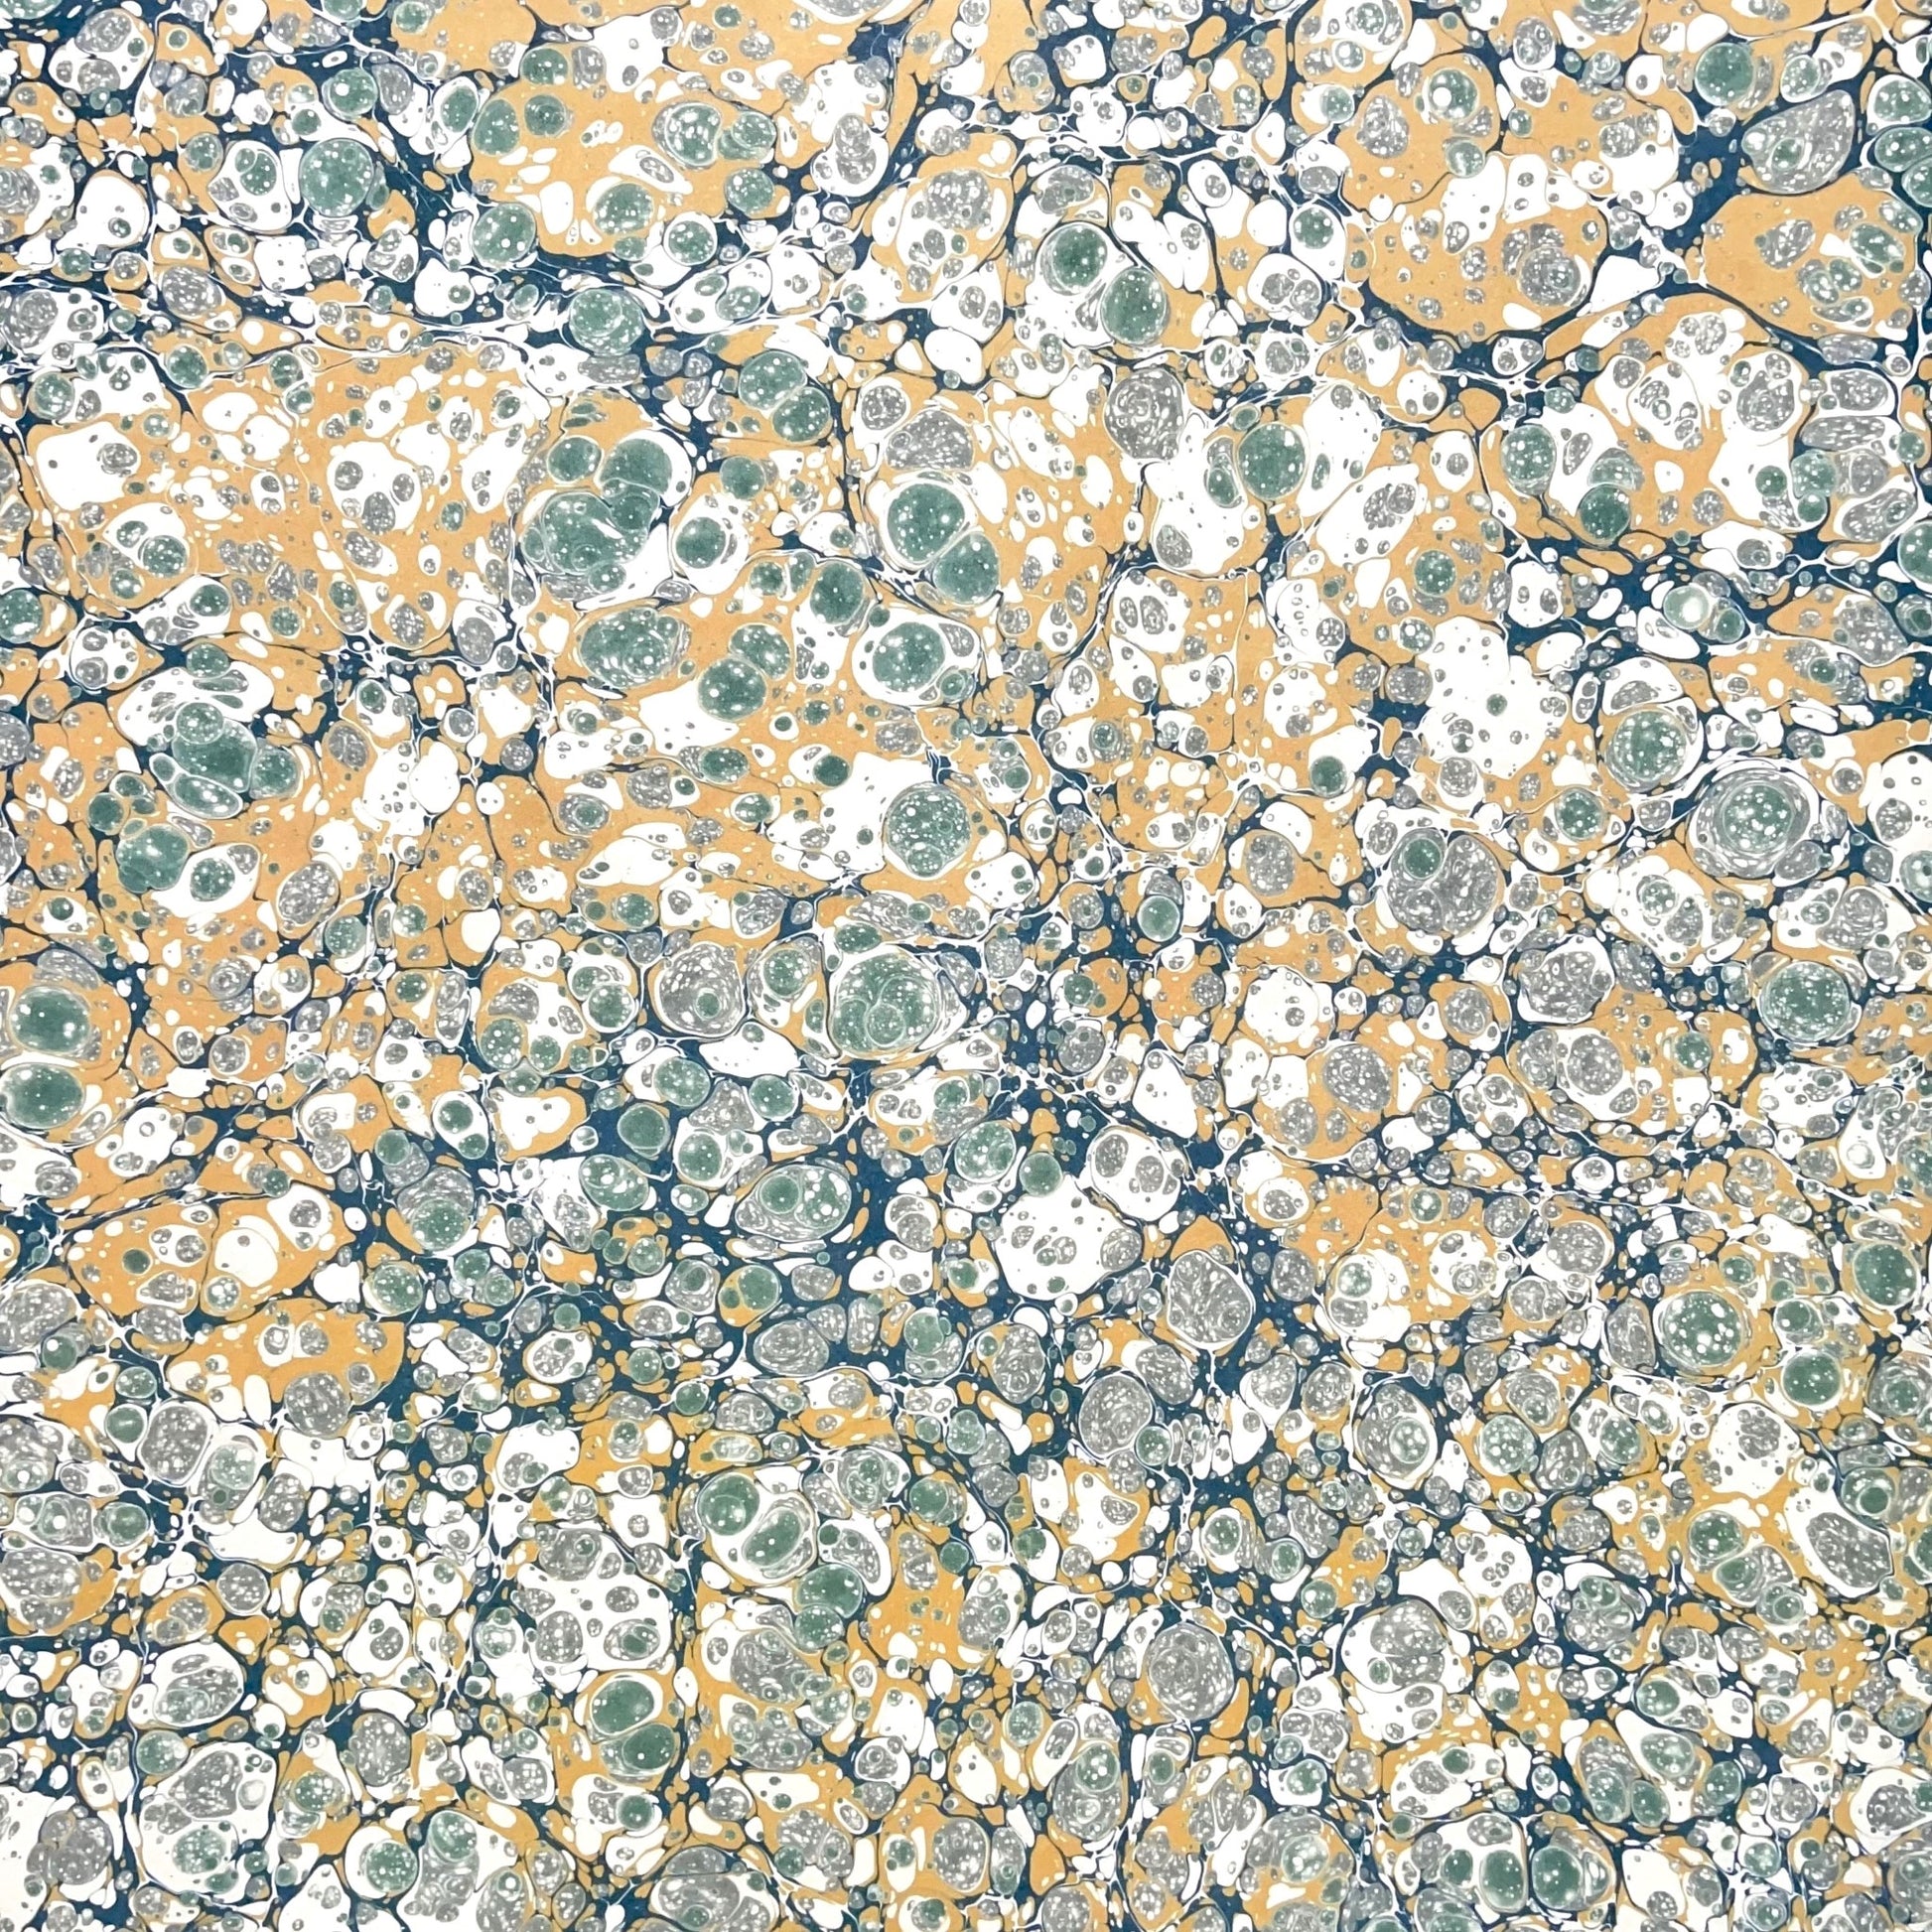 Printed marbled wrapping paper by Jemma Lewis Marbling. Marbled paper in soft greens, teal and yellow